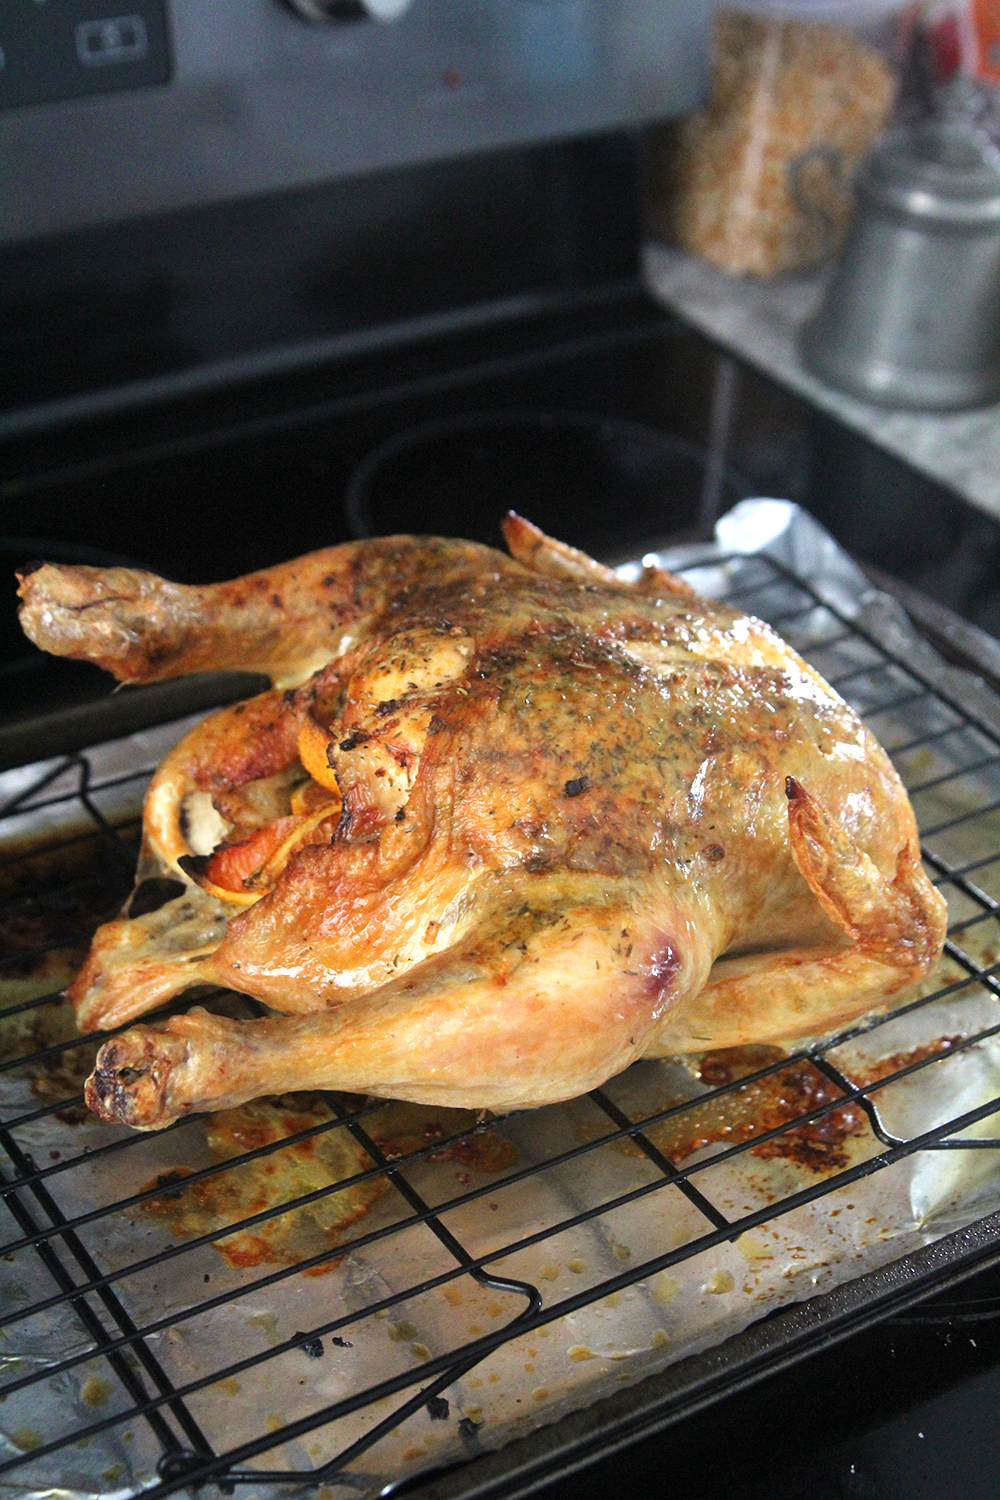 A brown and tan tinged roast chicken with orange wedges in the cavity sits on a black rack on top of a foil lined baking sheet.